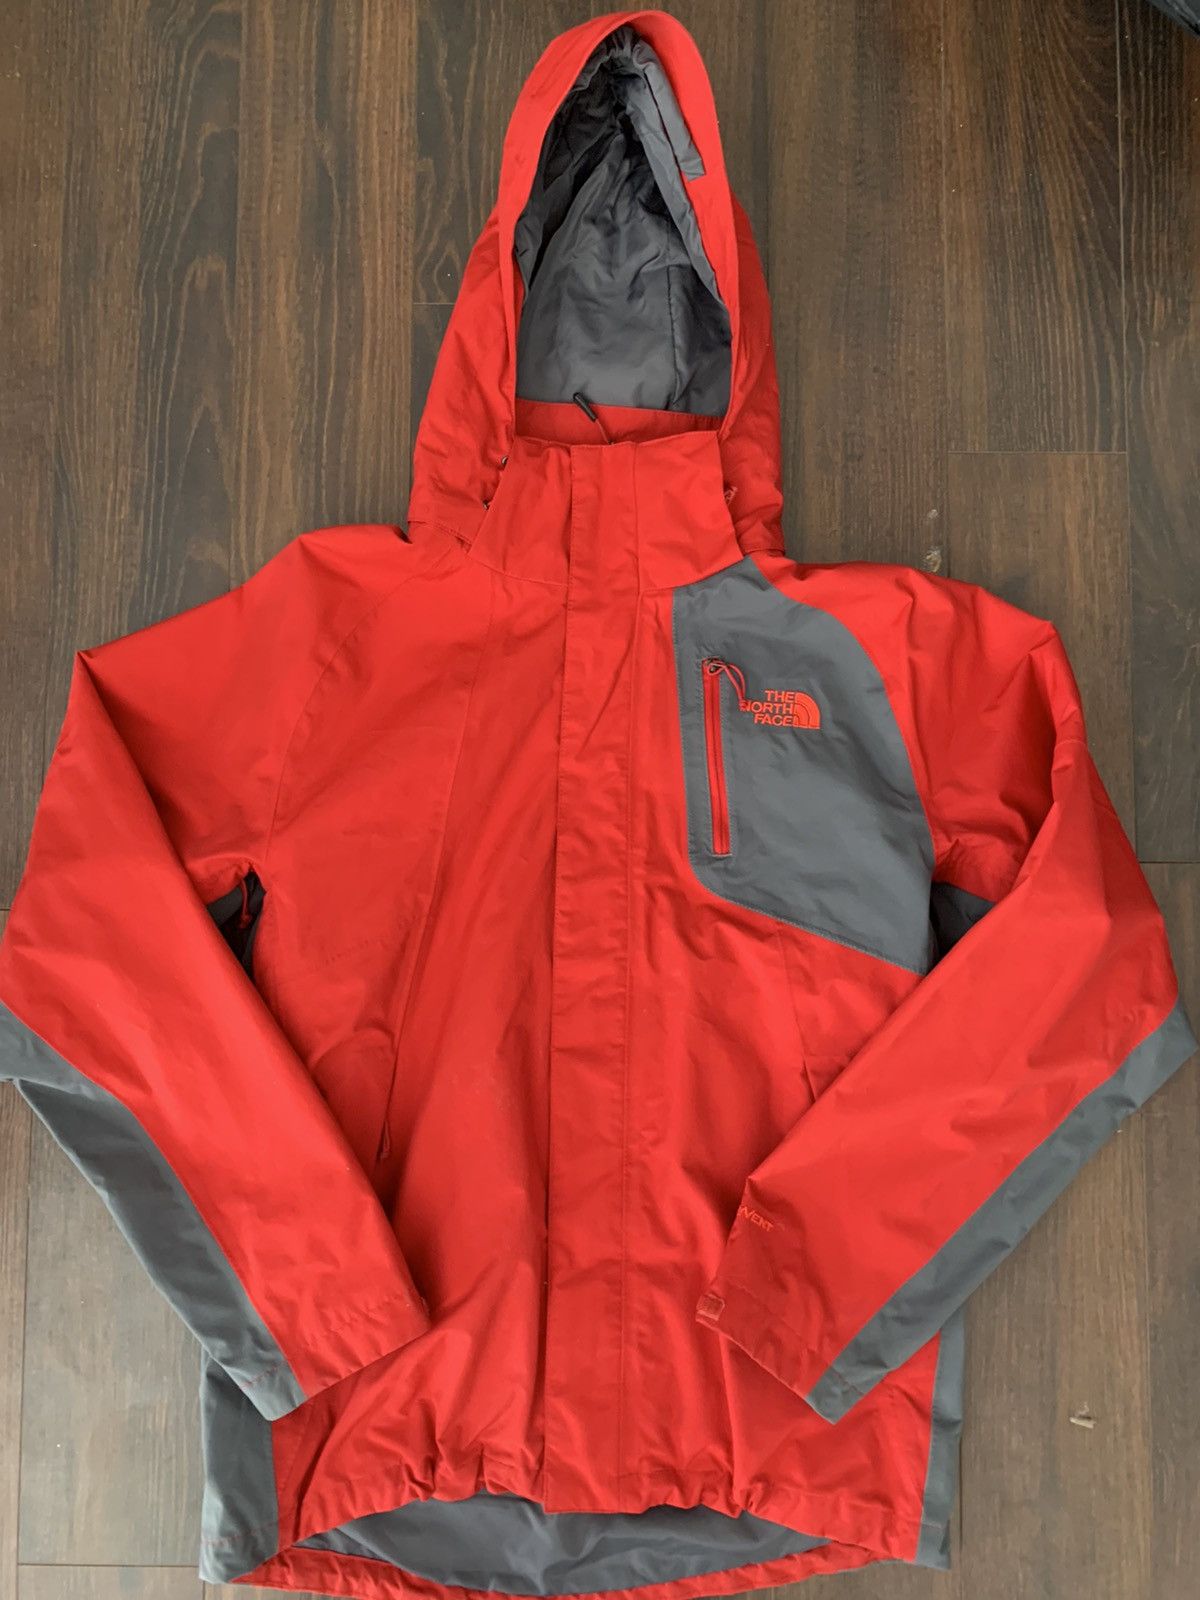 Vintage Red North Face Coat Size US S / EU 44-46 / 1 - 1 Preview